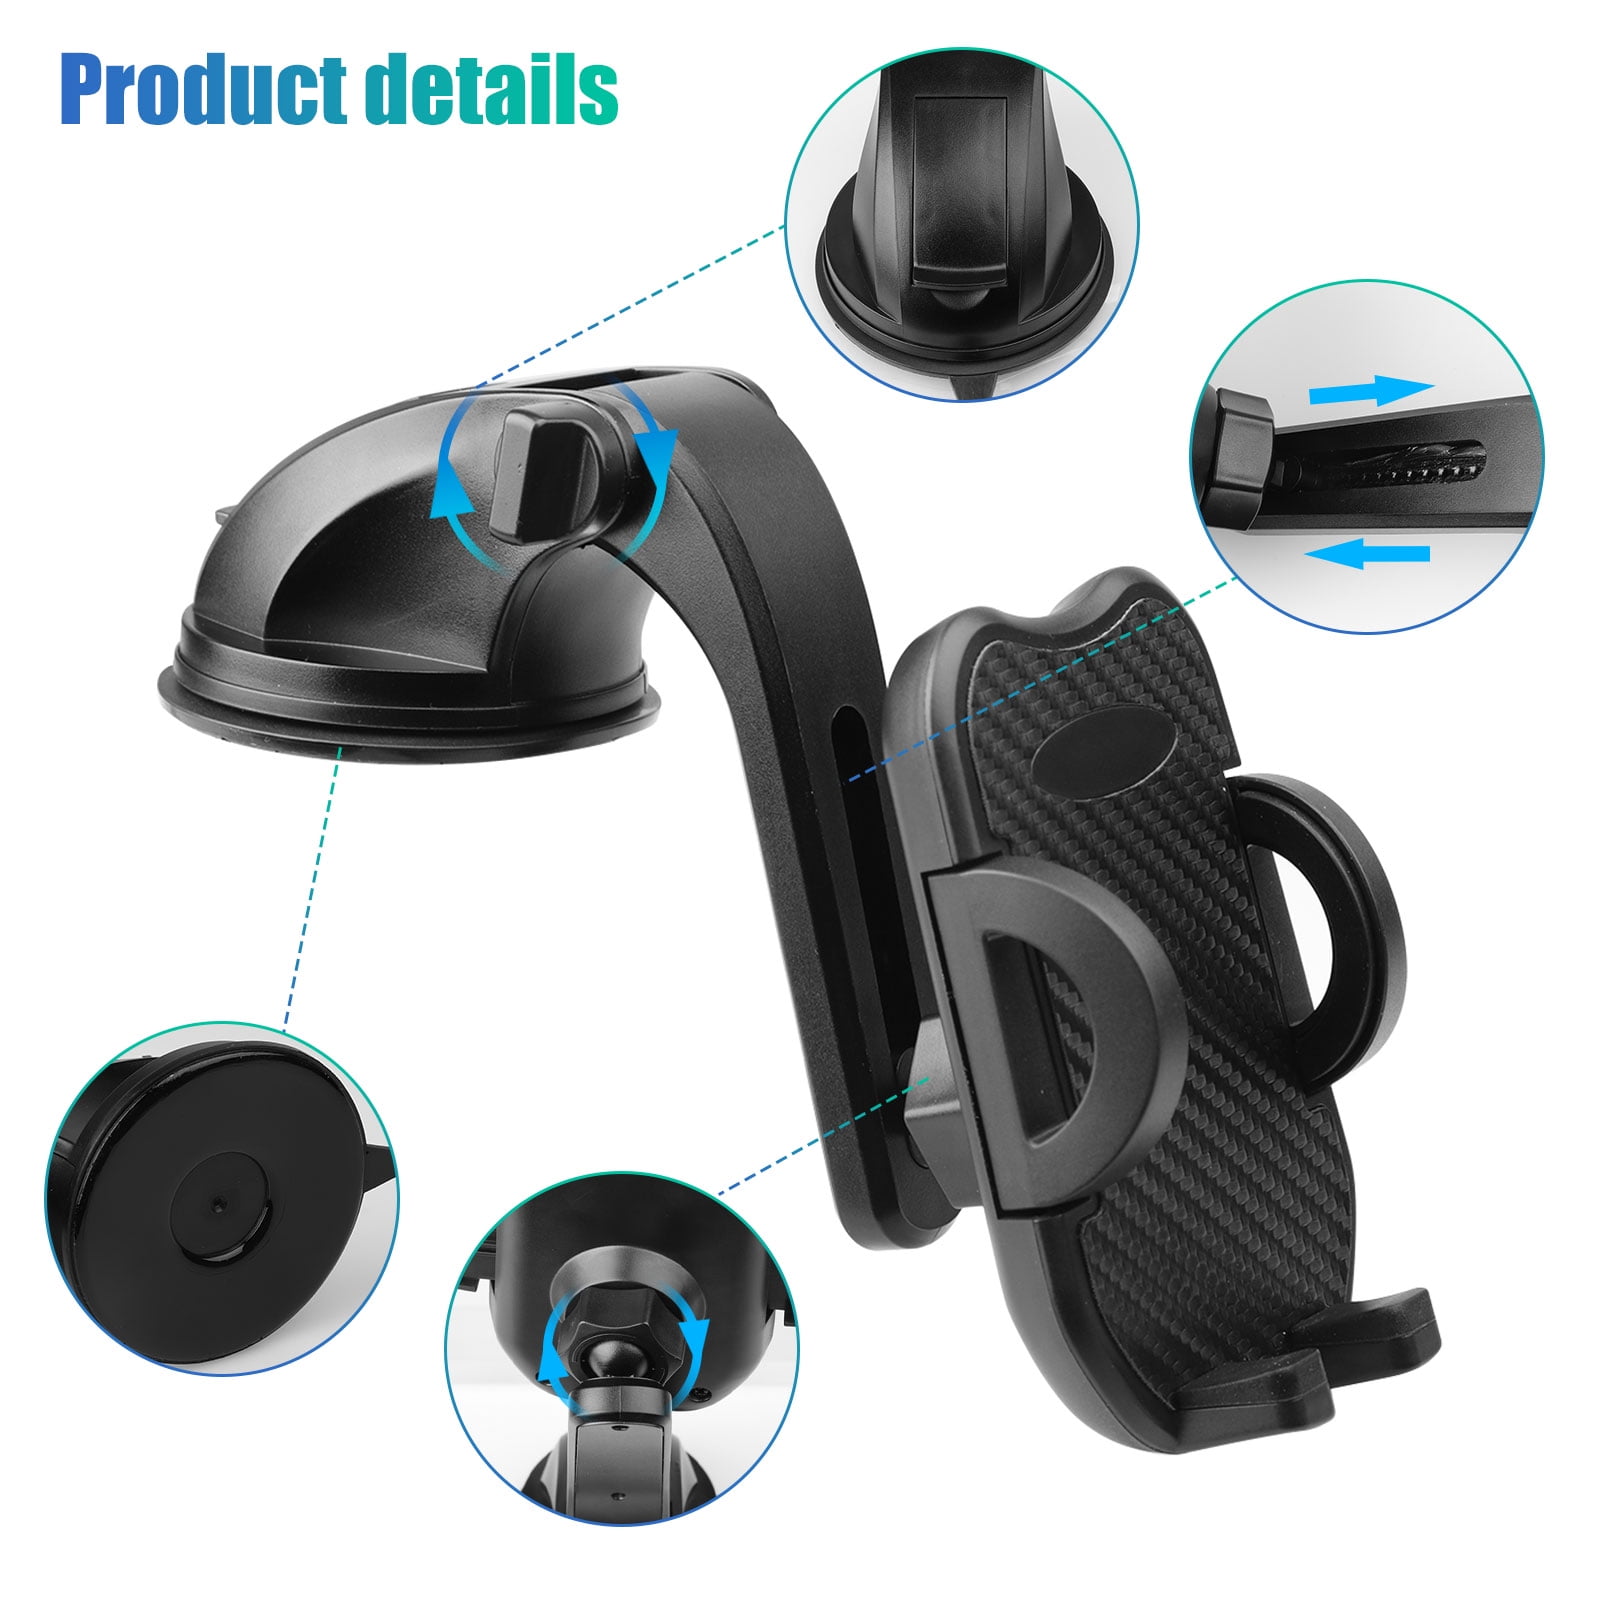 Details about   Universal Car Windshield Dashboard Suction Cup Mount Holder Stand for Cell Phone 